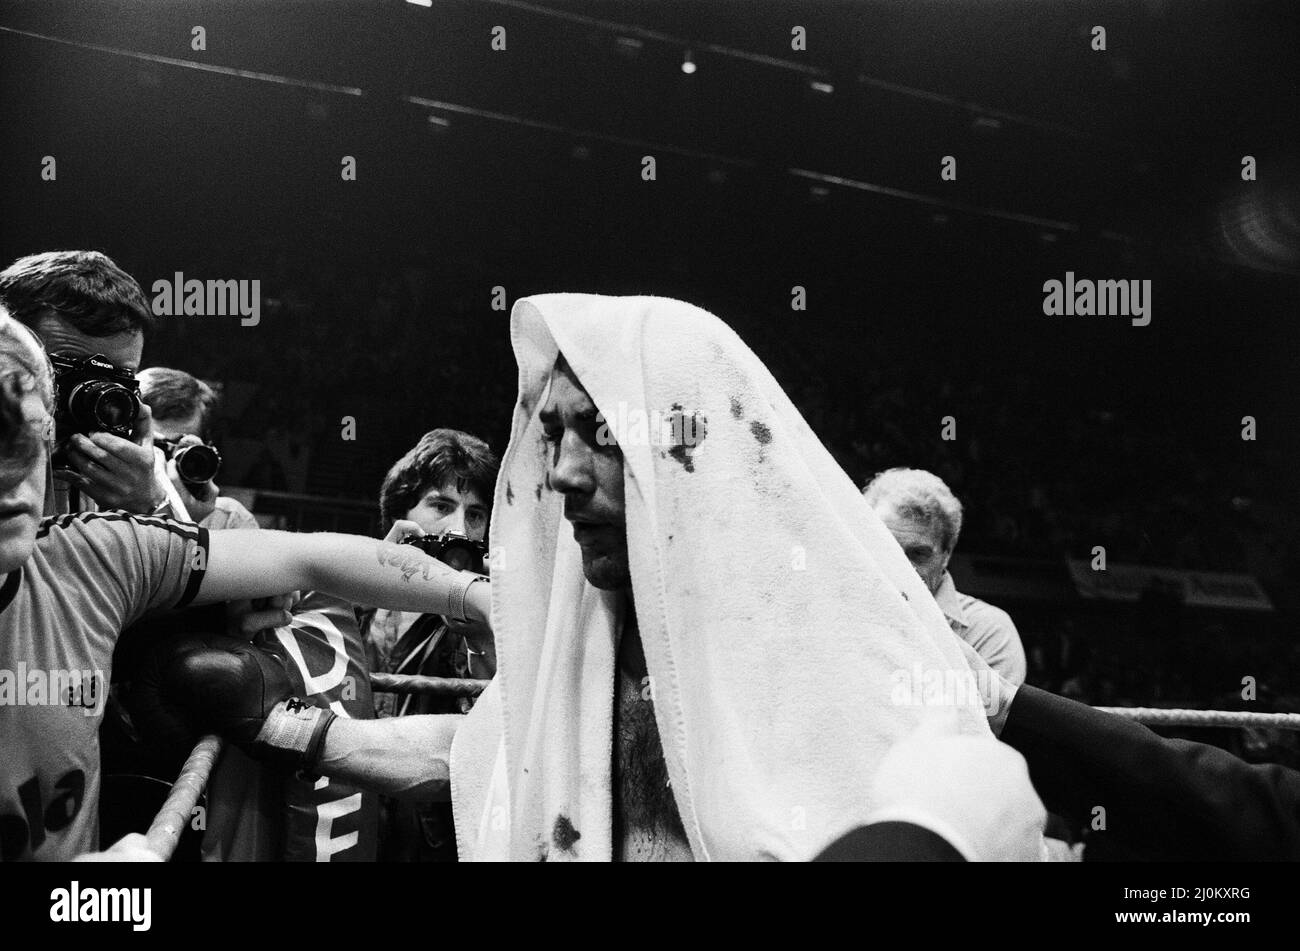 Alan Minter vs. Marvin Hagler, WBA and WBC world middleweight title fight, Wembley Arena, London, England.This was a grudge match in which Hagler won by TKO in the third round. Hagler went six years undefeated before losing his titles to Sugar Ray Leonard in 1987. (Picture Shows) A blooded Alan Minter with a towel over his head after the fight. 27th September 1980 Stock Photo